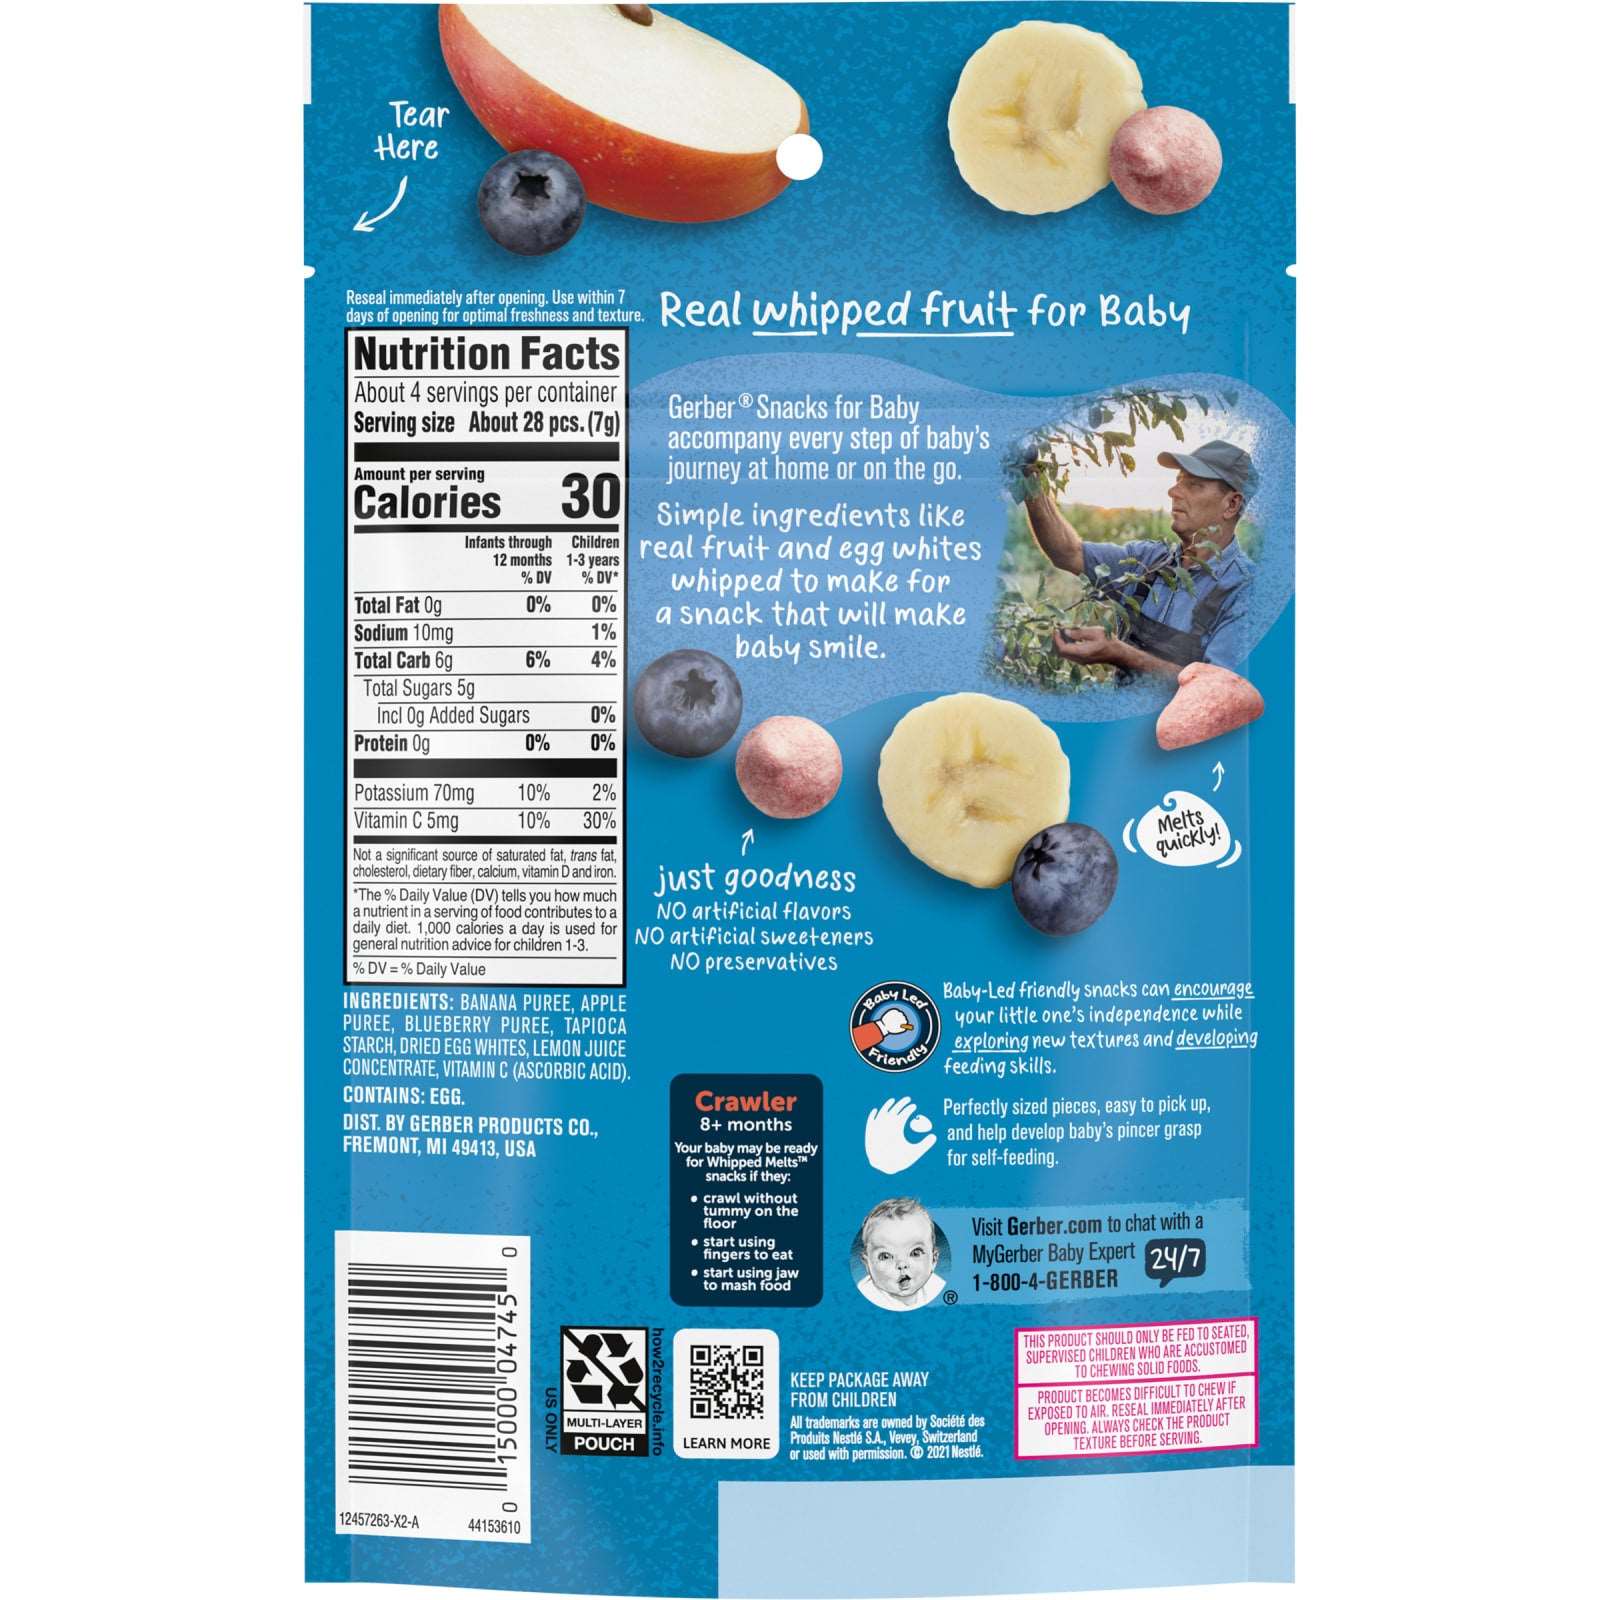 Gerber, Natural for Baby, Whipped Melts, 10 Months+, Banana Apple Blueberry, 1 oz (28 g)